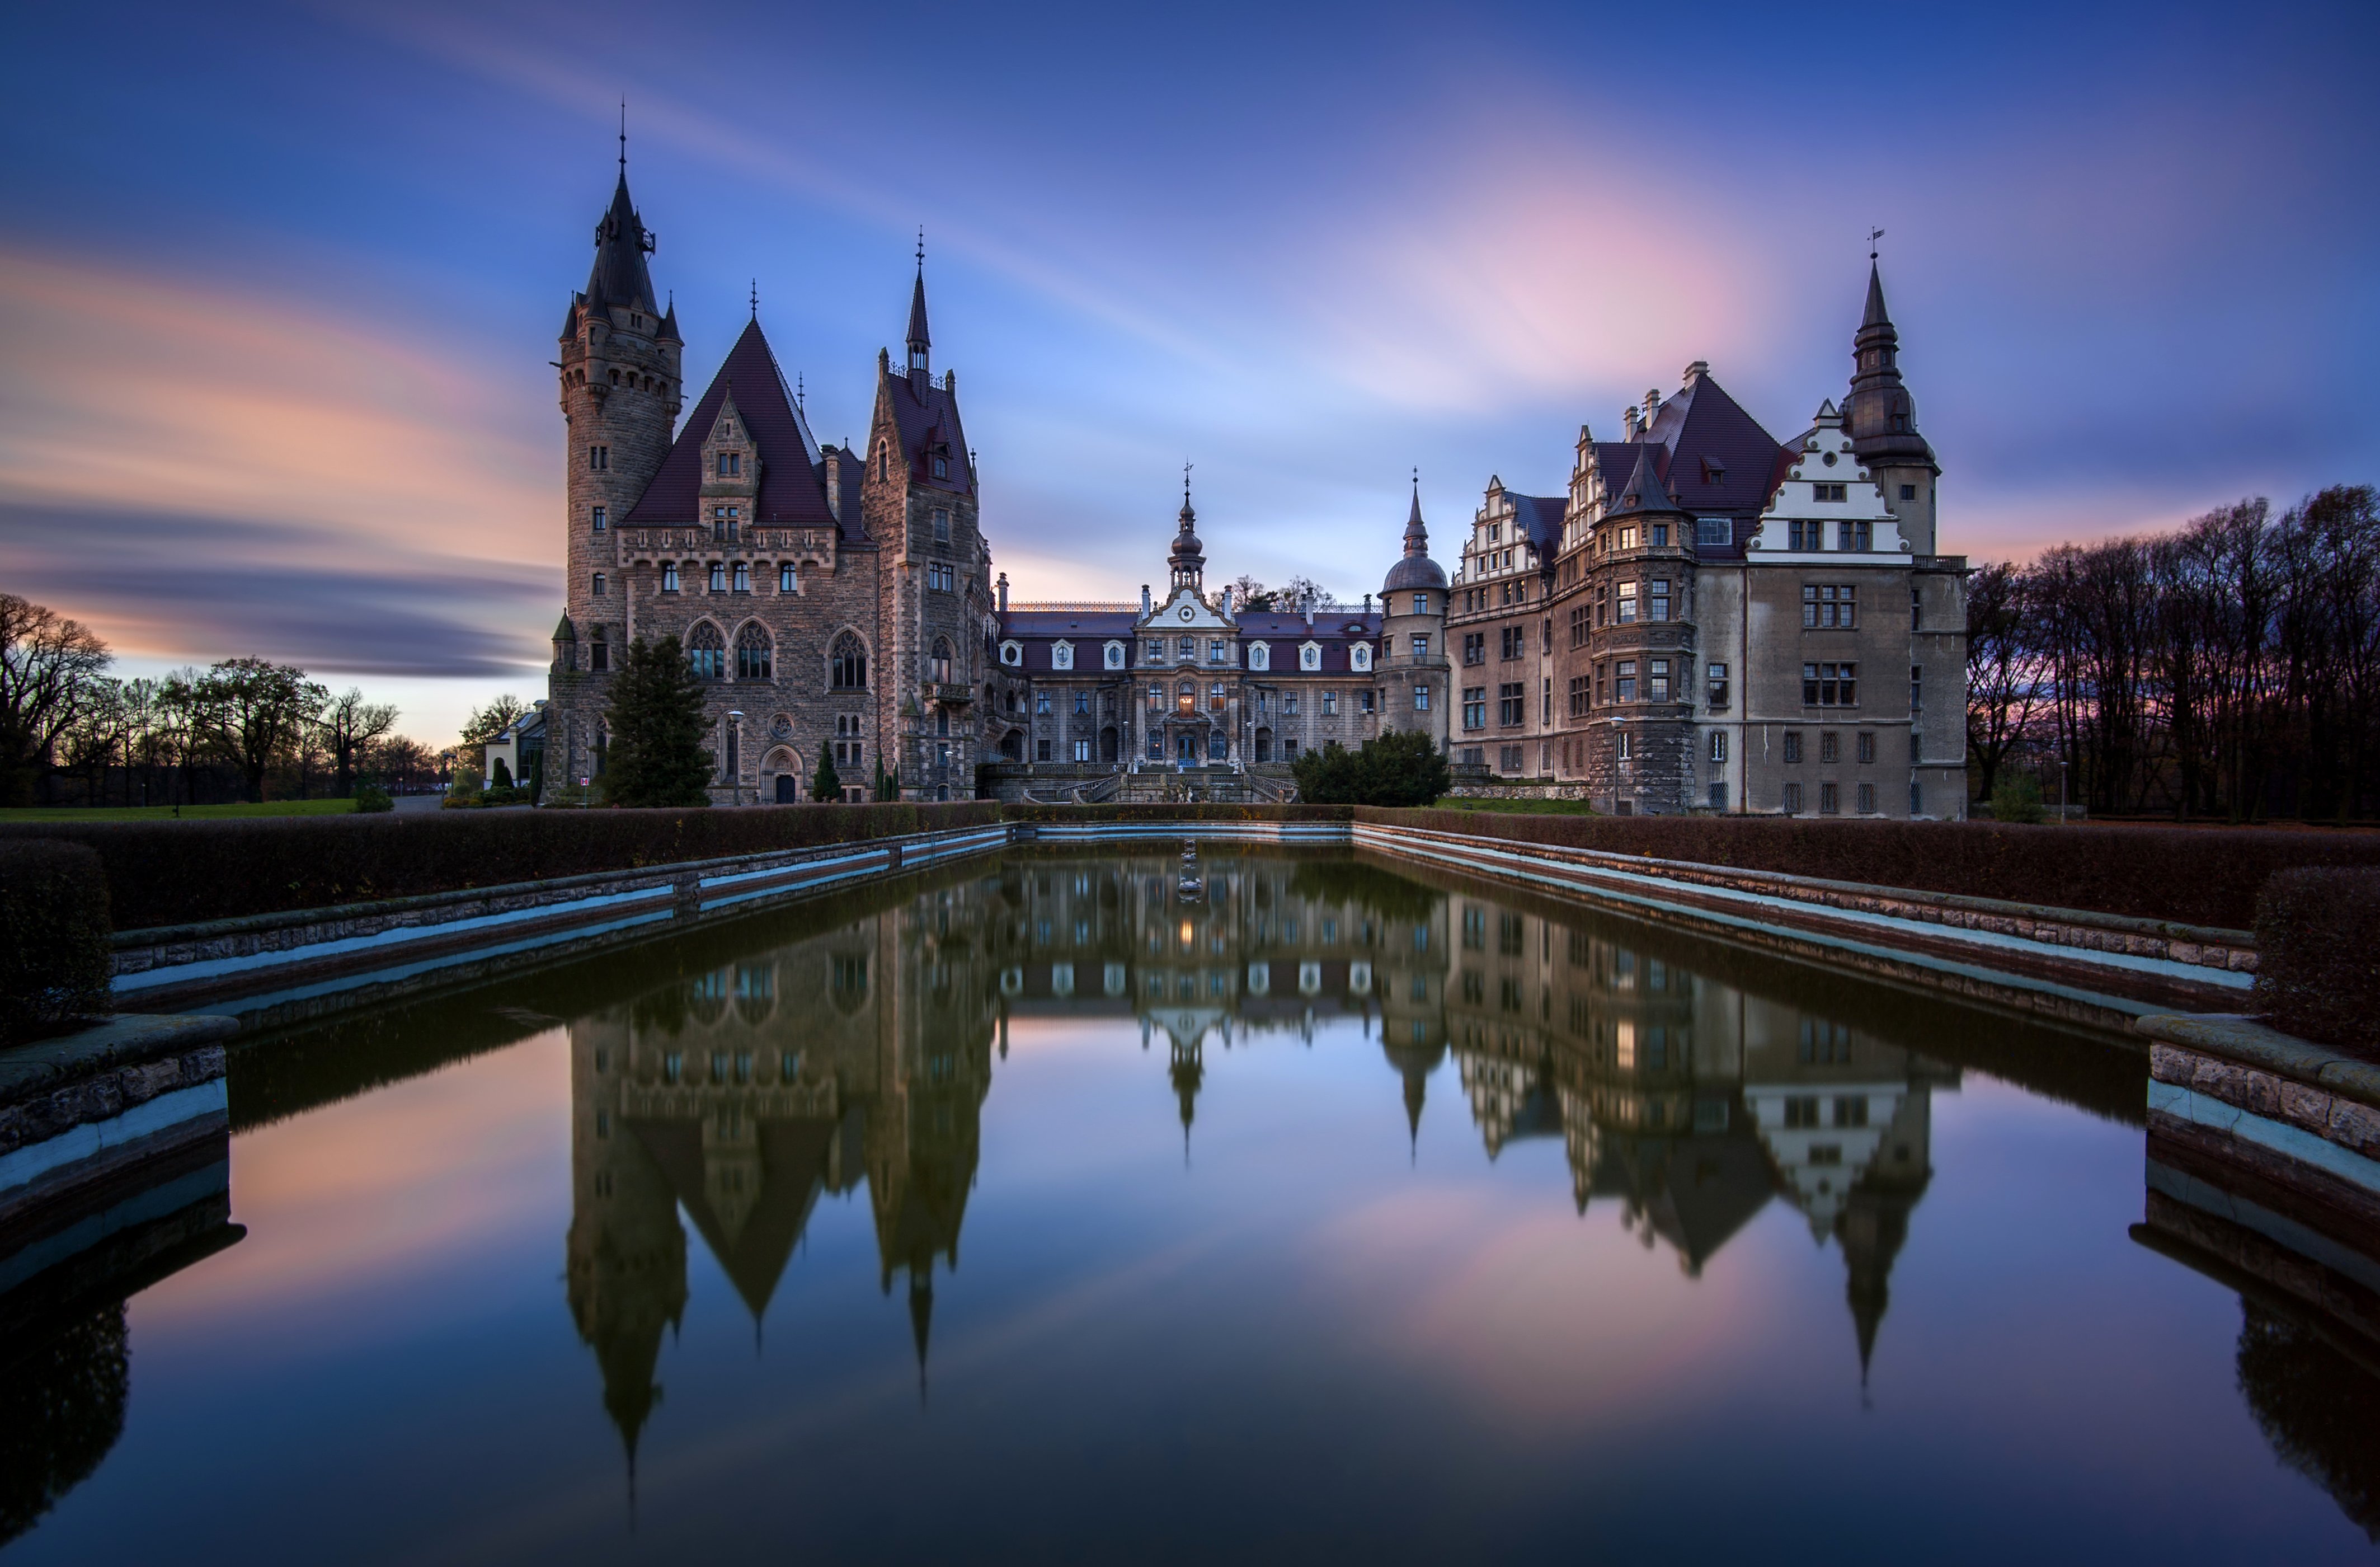 poland, Castle, Pond, Sunrise, And, Sunset, Moszna, Cities, Reflection Wallpaper